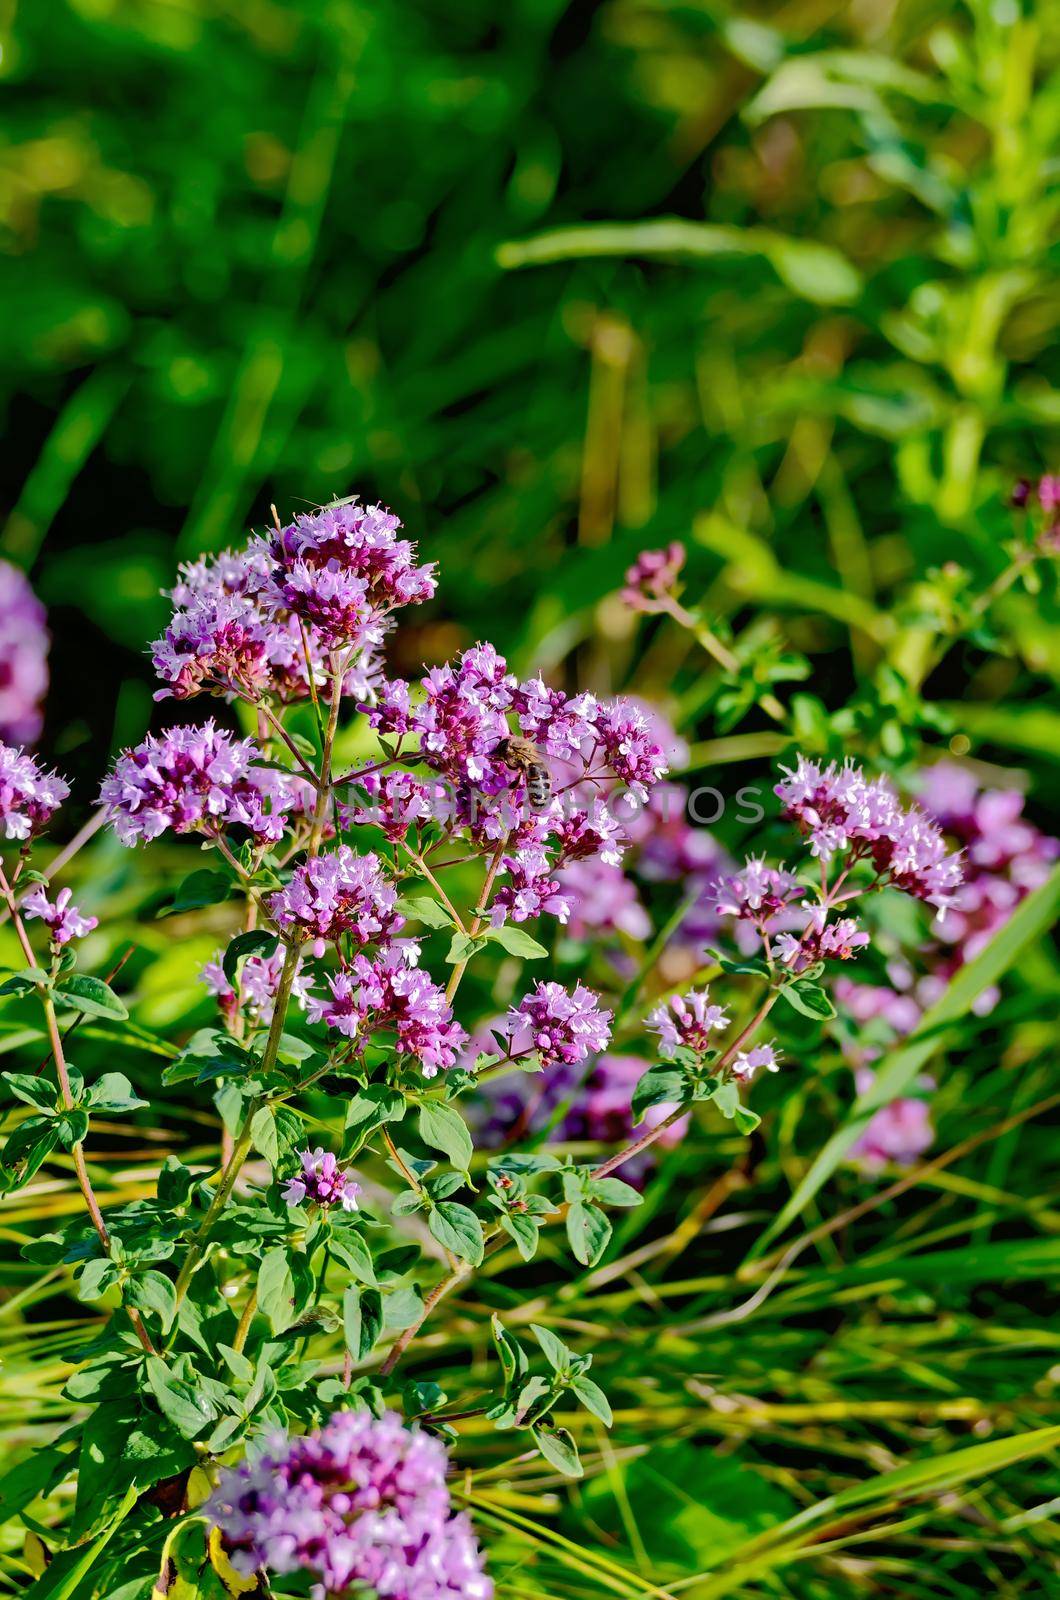 Lilac and pink flowers oregano with leaves on a background of green grass